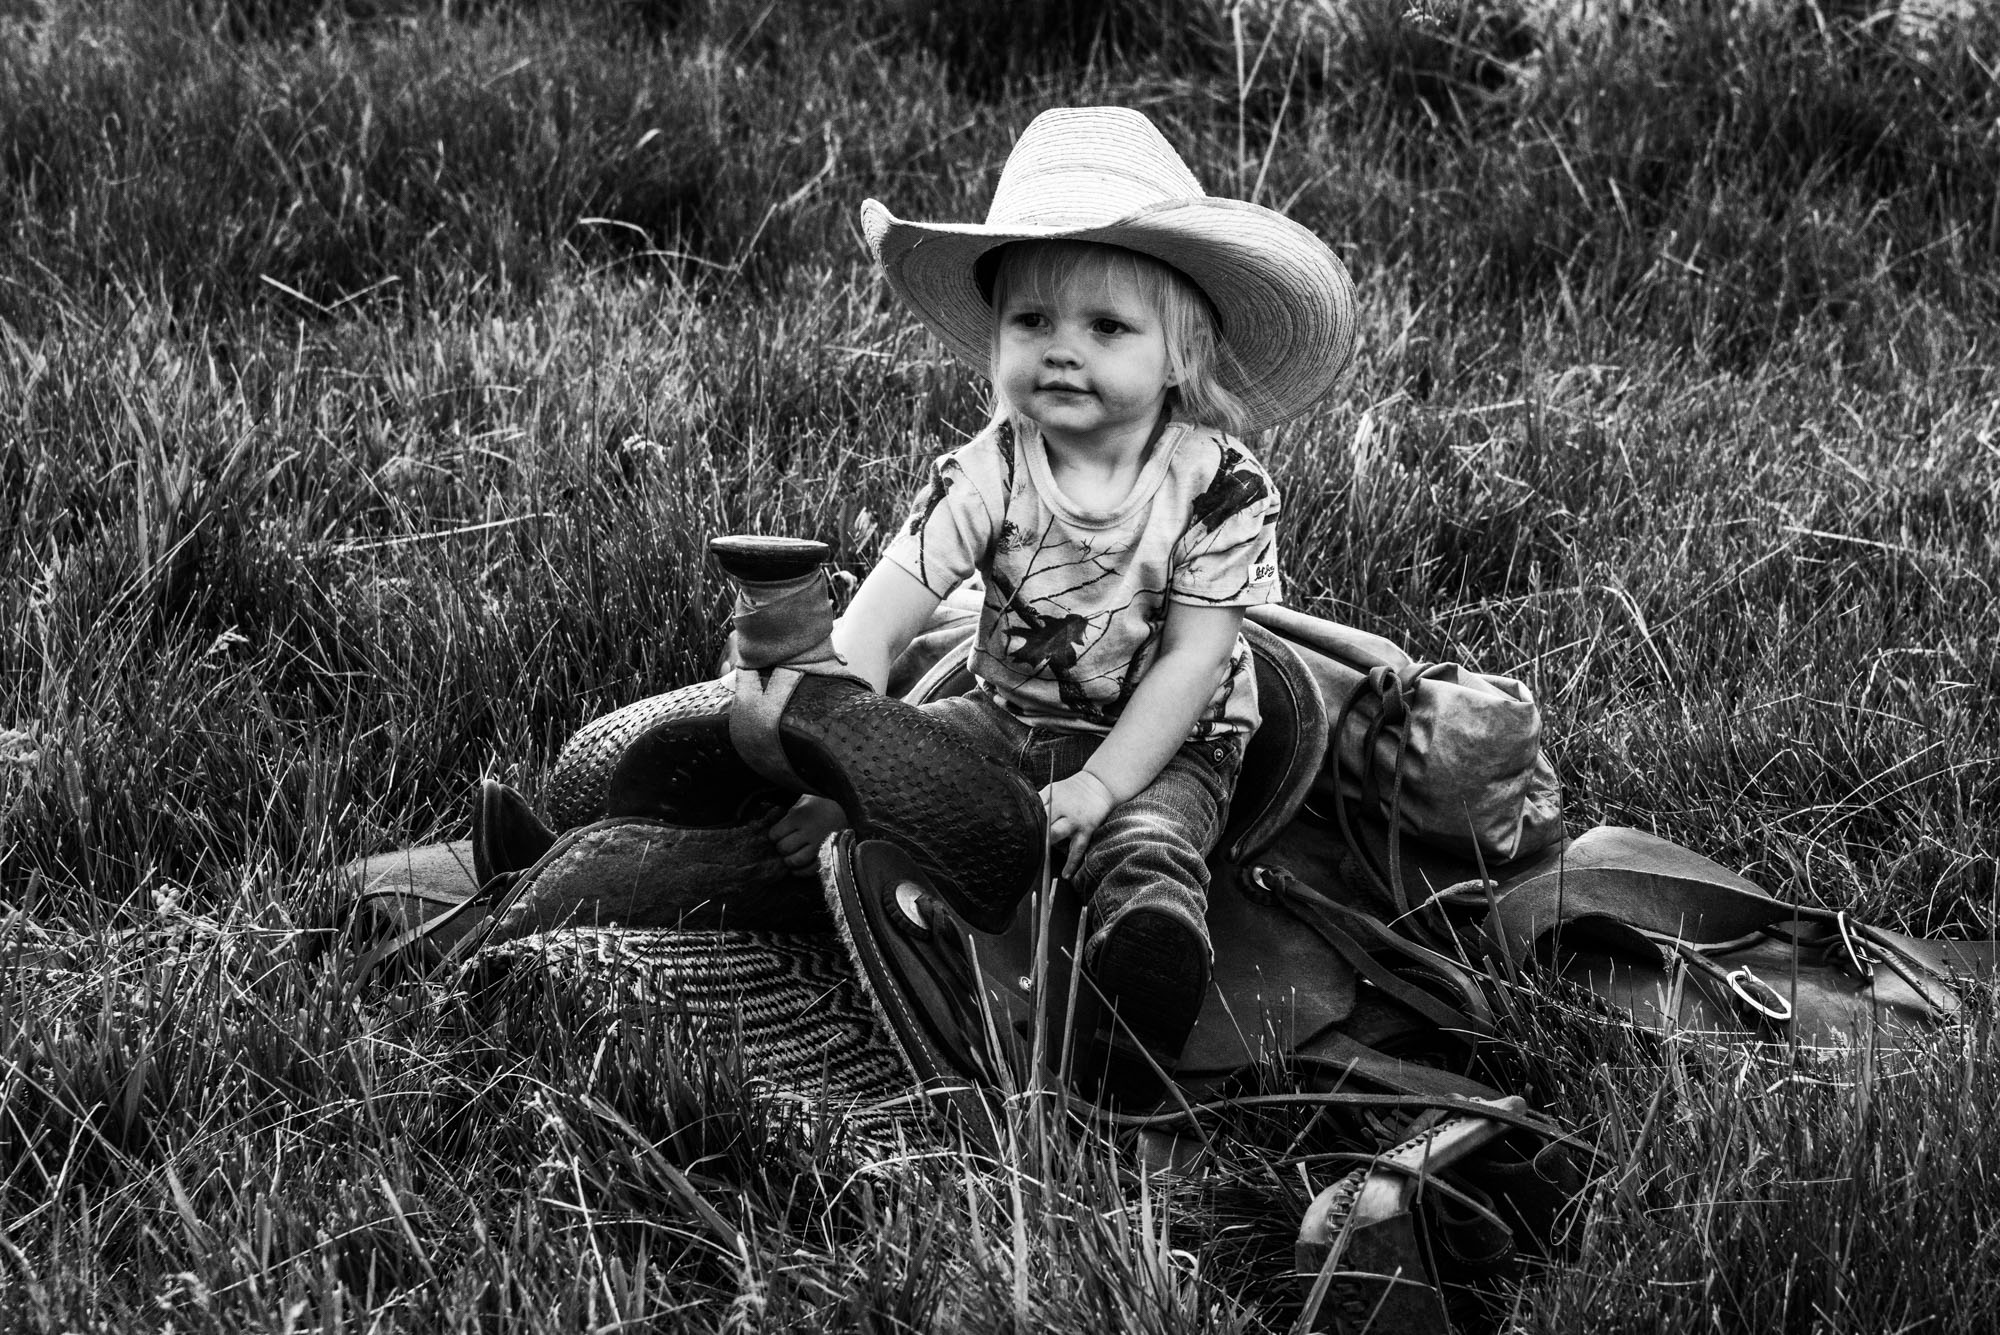 Fine Art Limited Edition Photo Prints of Cowboys, Horses, and life in the West. Future Barrel Racer - Cowboy pictures in black...